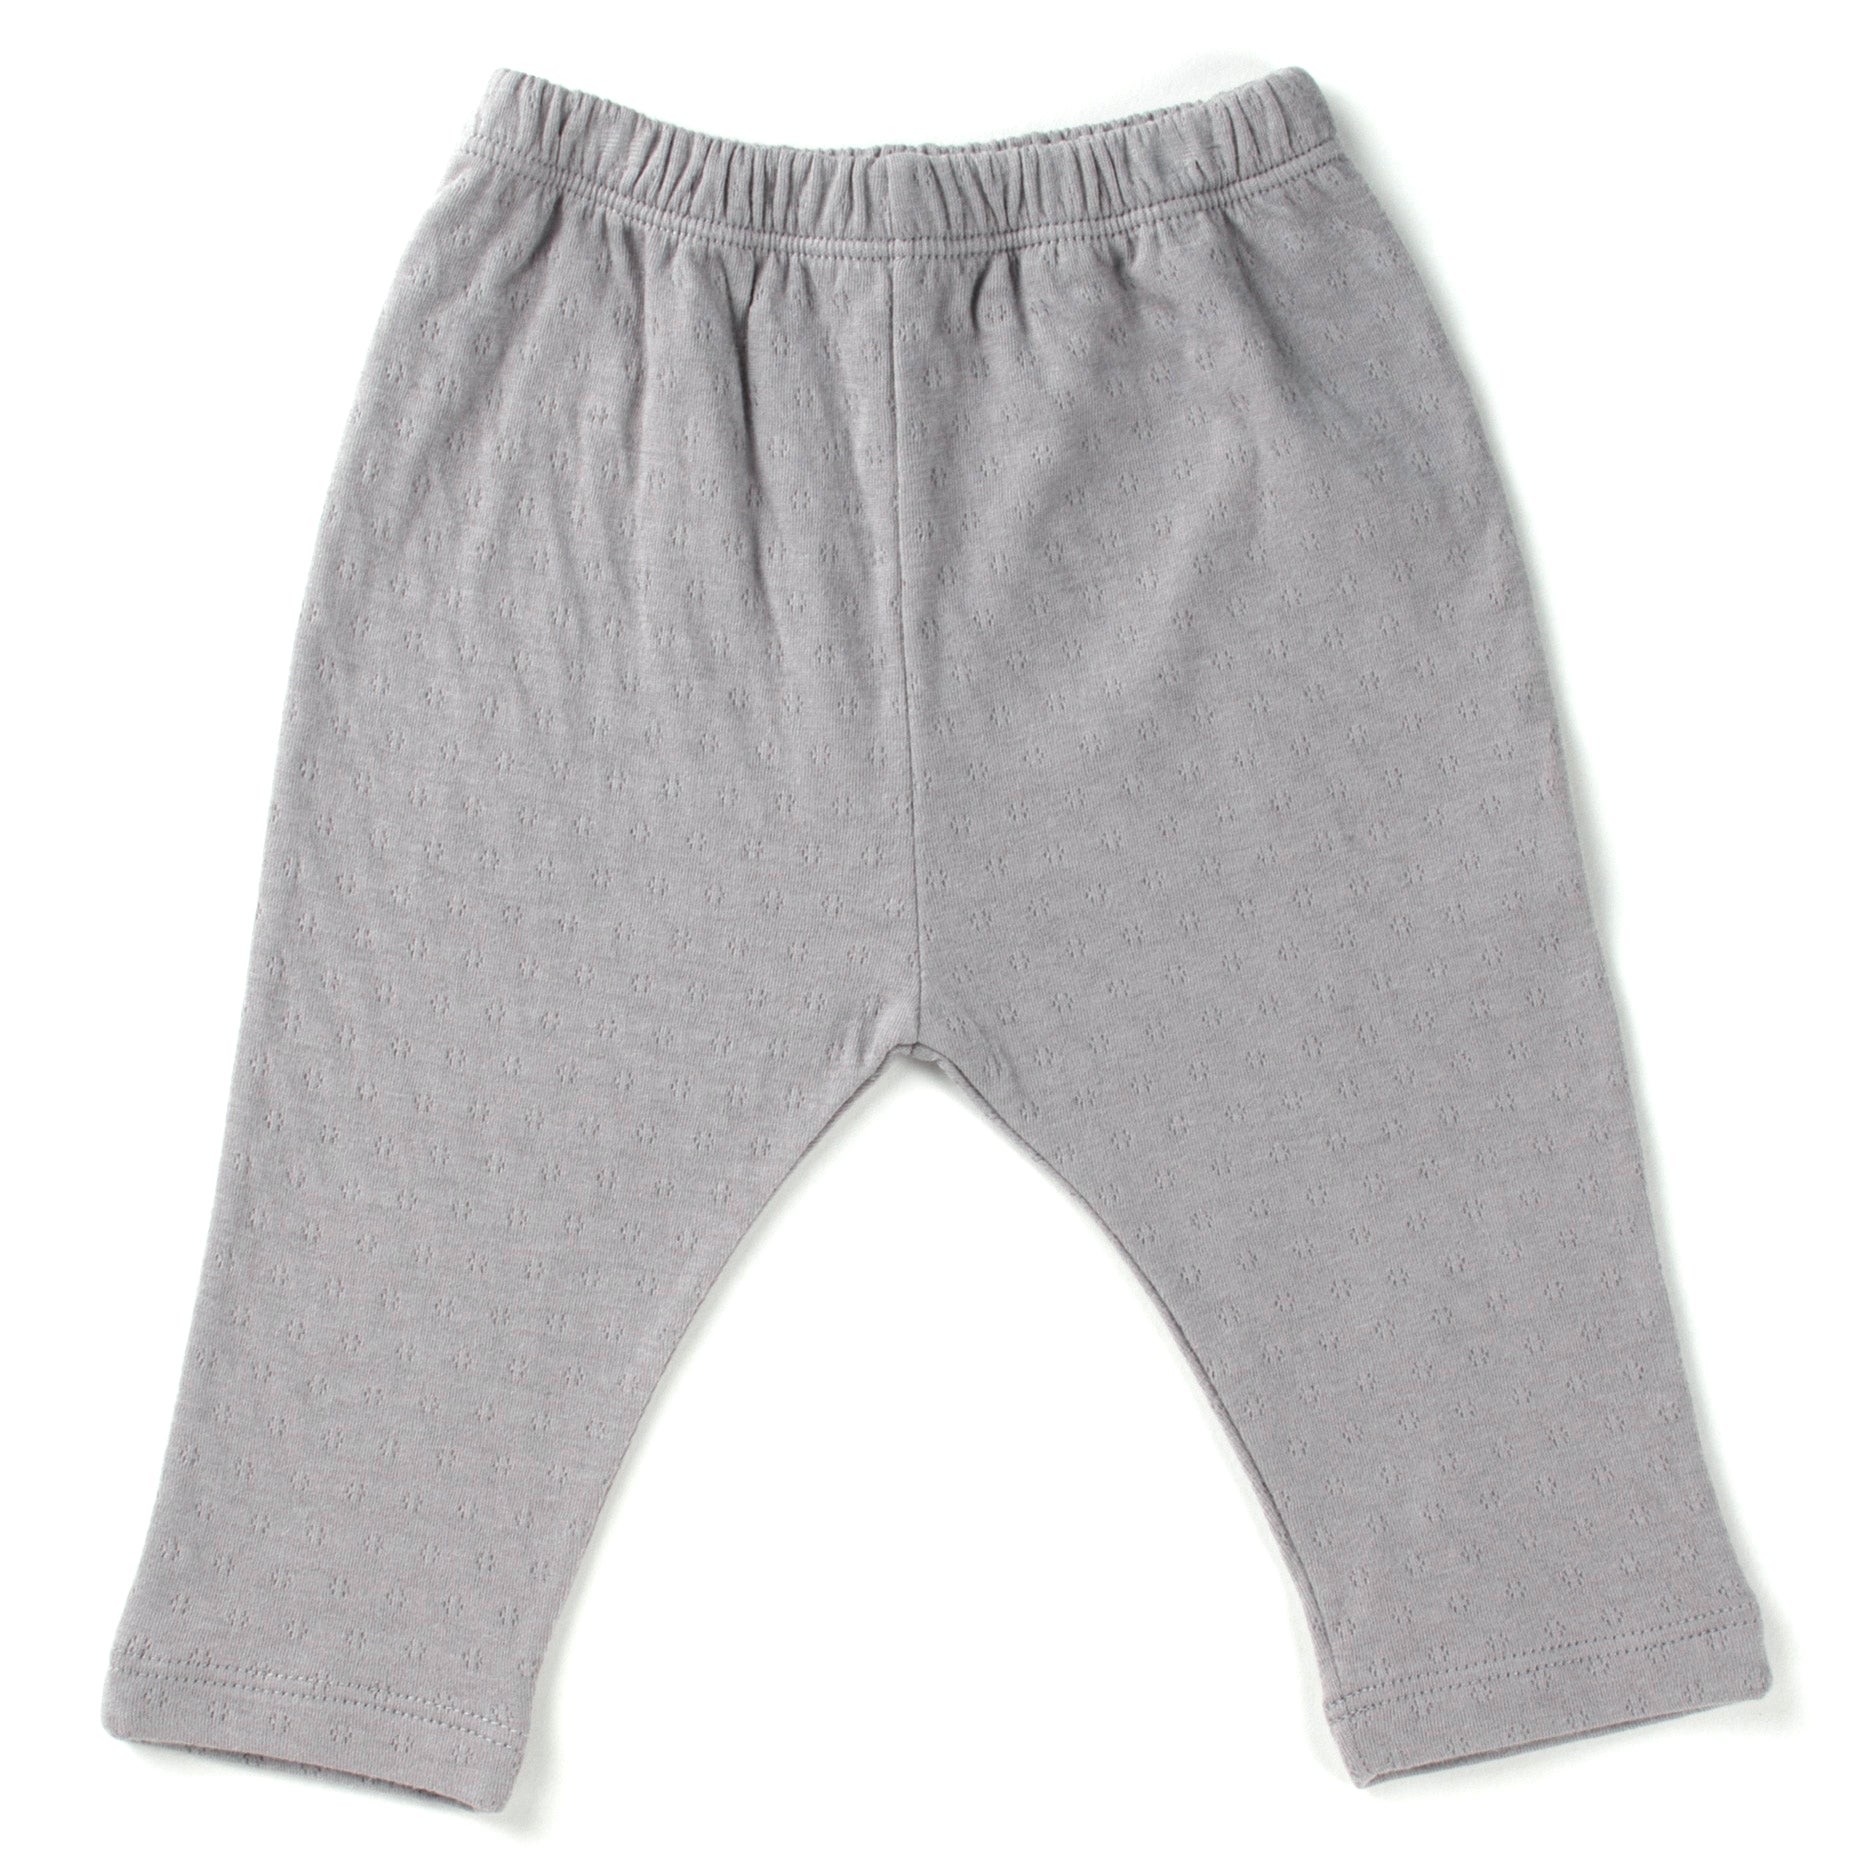 cool grey straight leg pointelle ribbed pants with soft encased elastic at waistband.  100% organic cotton.